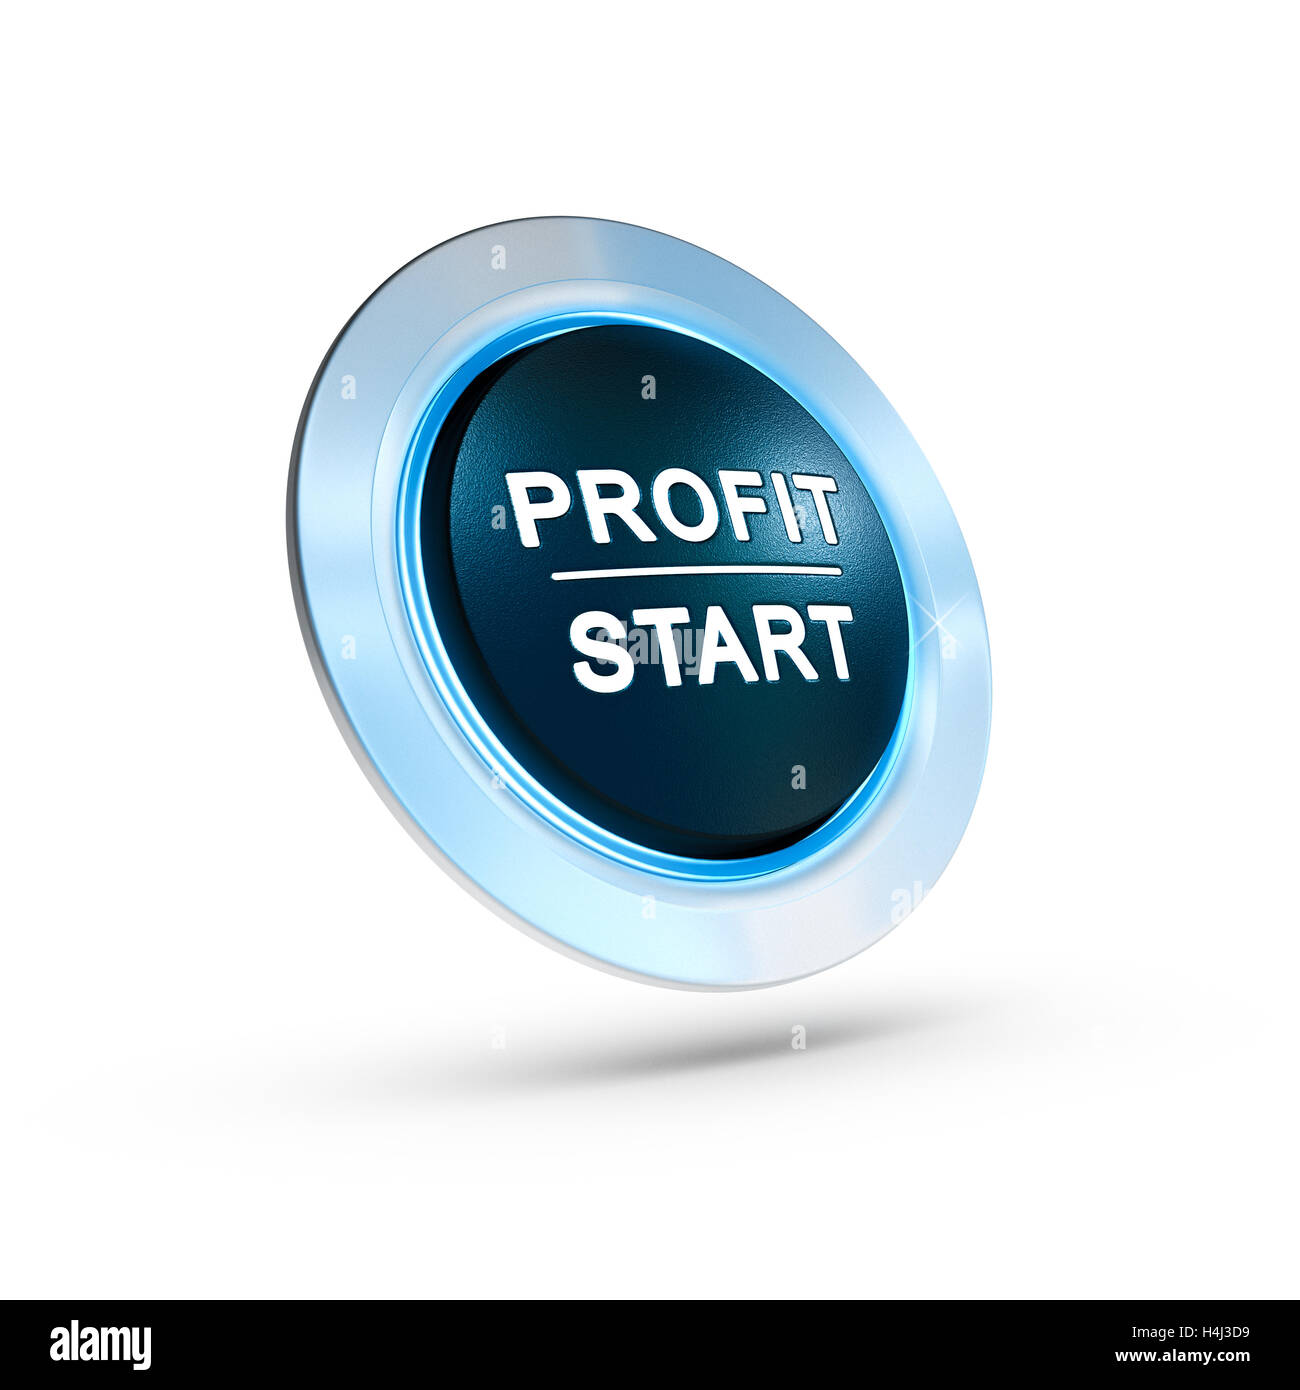 3D illustration of a profit start button over white background with blue light. Finance concept Stock Photo